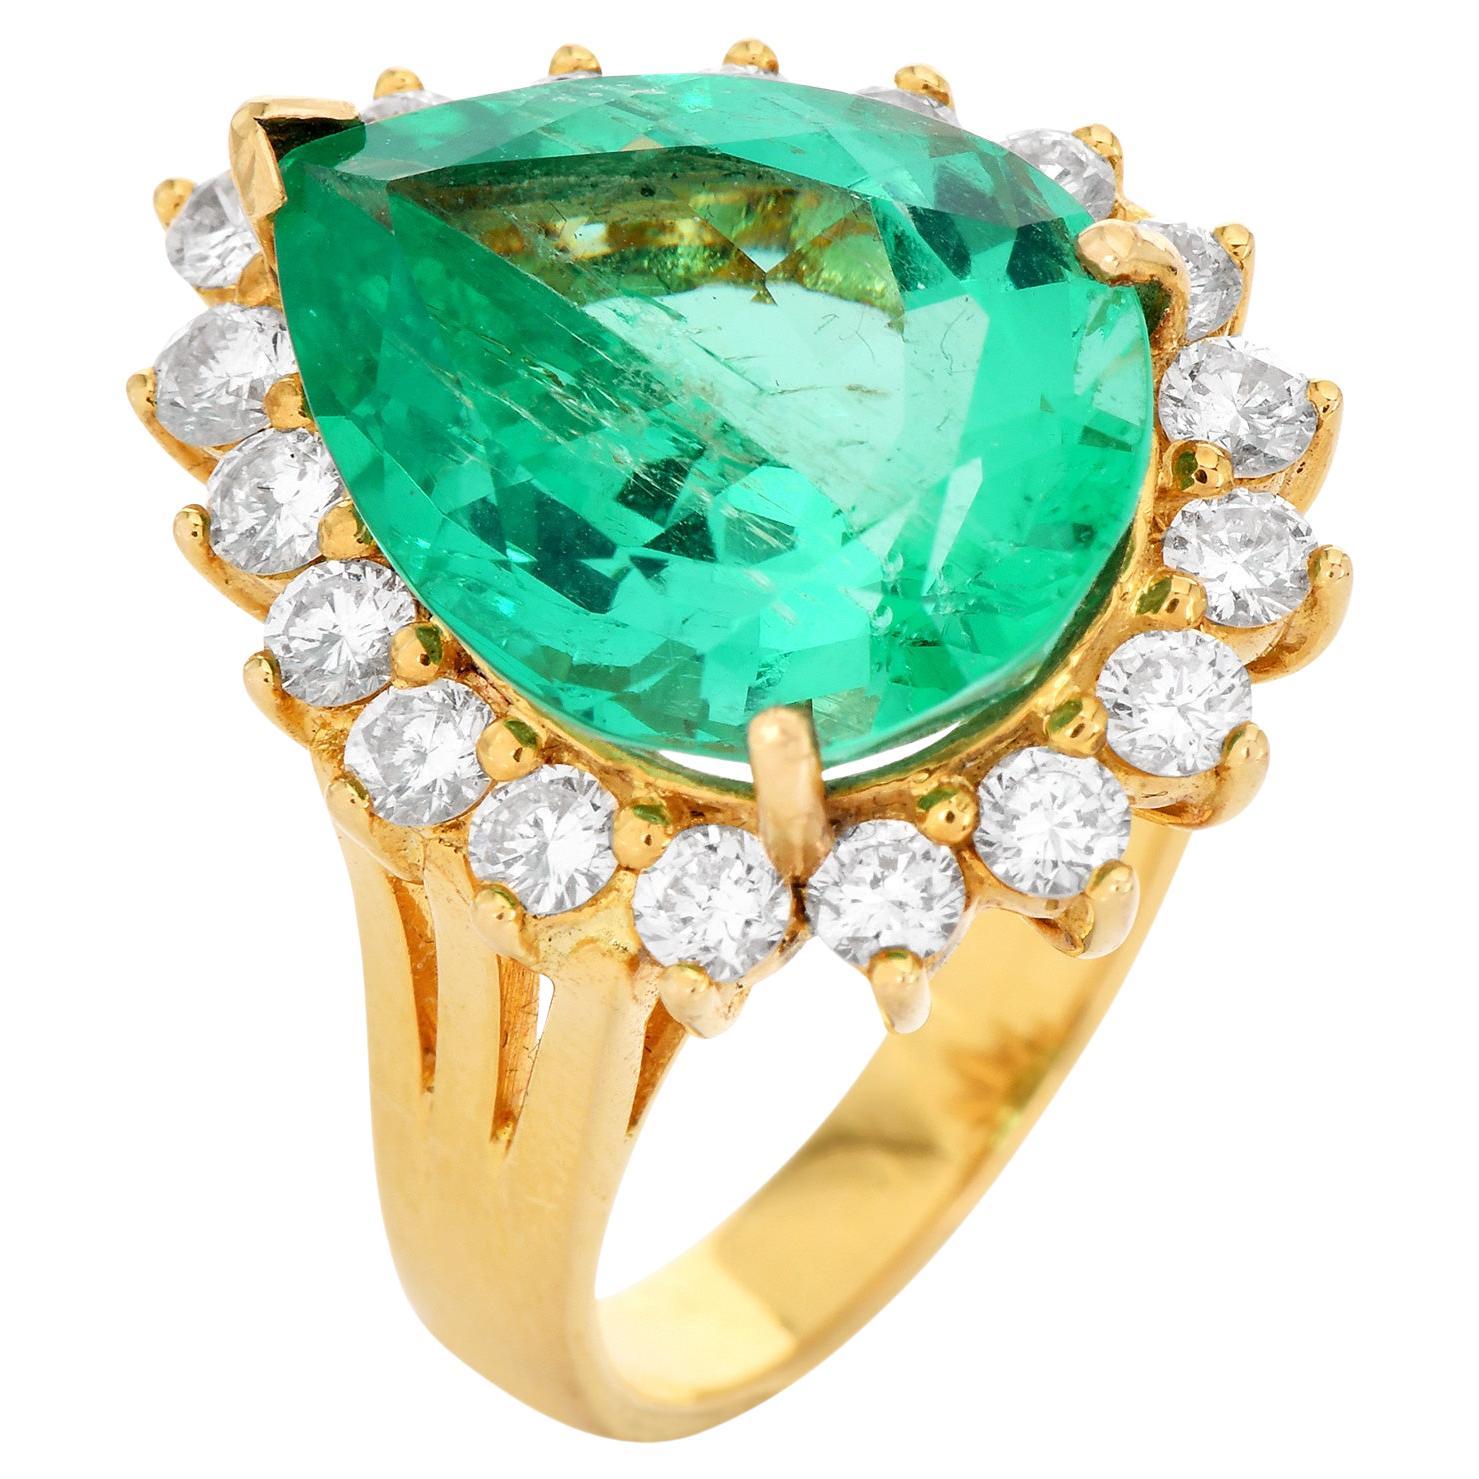 GIA Certified Colombian Emerald & Diamond Halo Cocktail Ring

Presenting a spectacular Brilliant Pear cut Colombia Emerald GIA Certified with high-quality shine and life. it is surrounded by natural round Diamonds in a Halo set in 18K Yellow